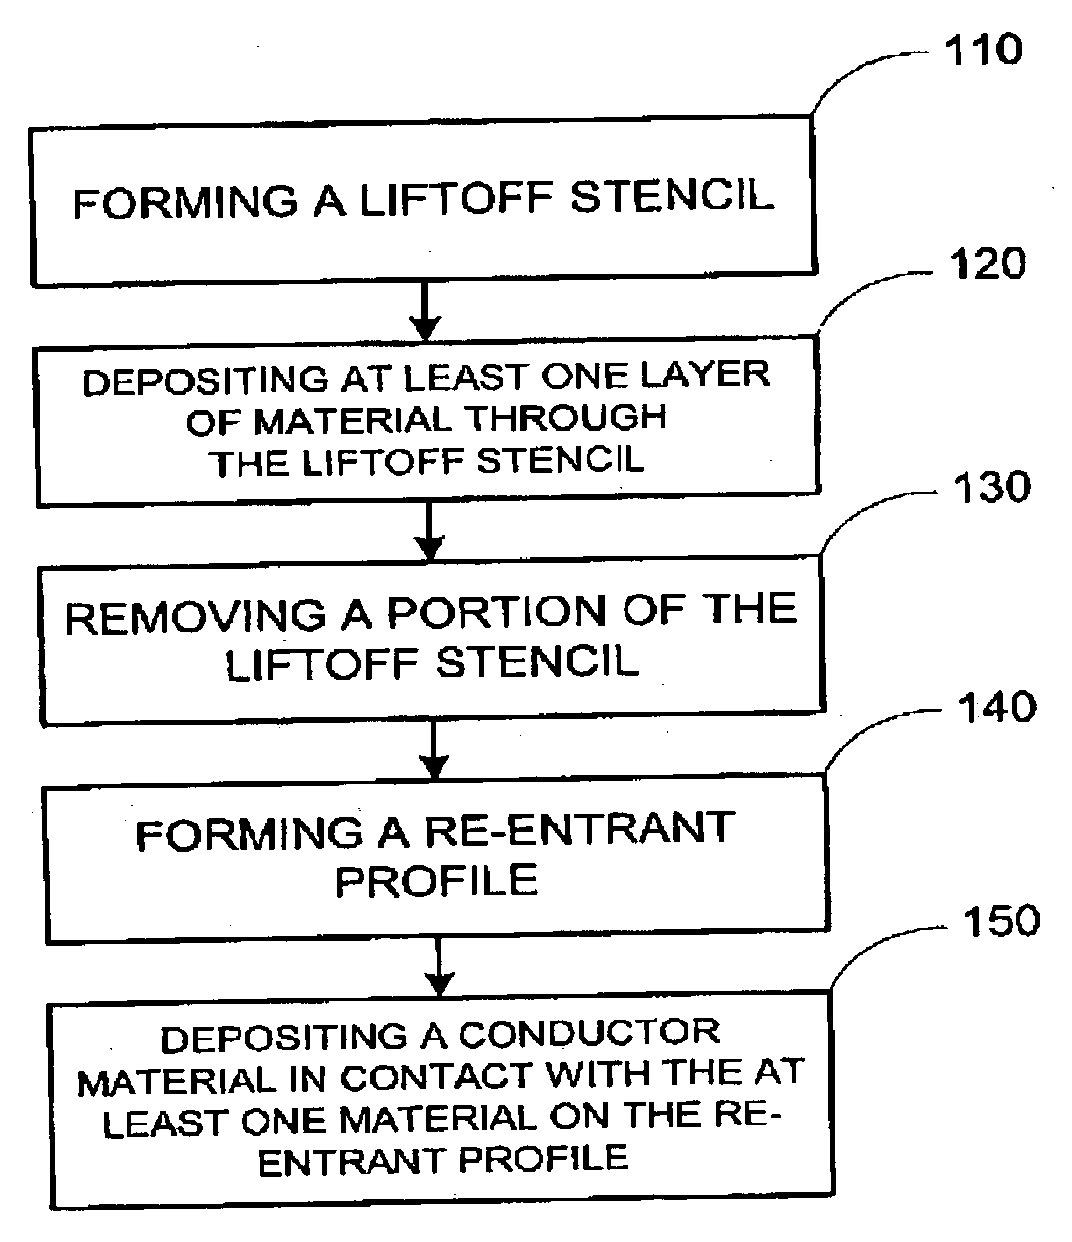 Forming a contact in a thin-film device